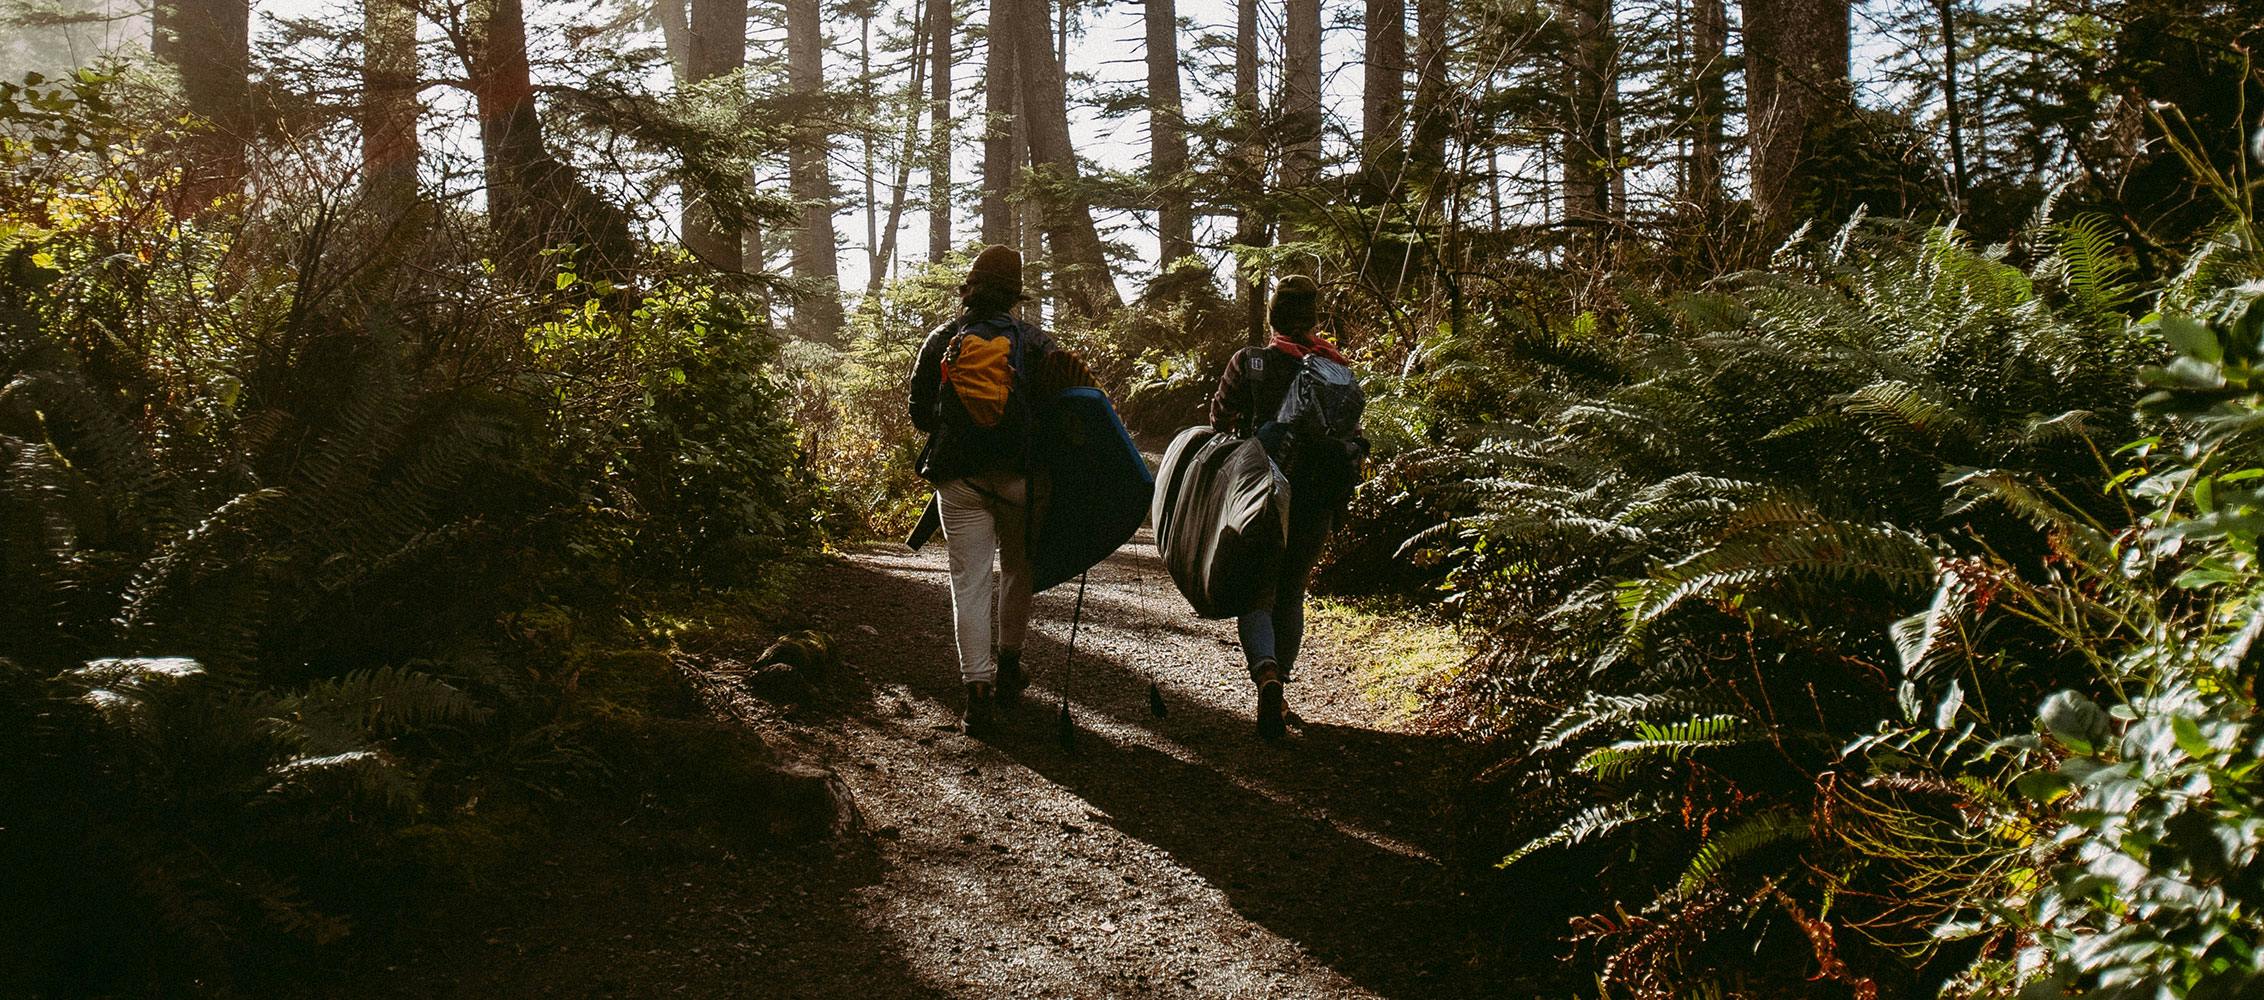 Two hikers in a forest